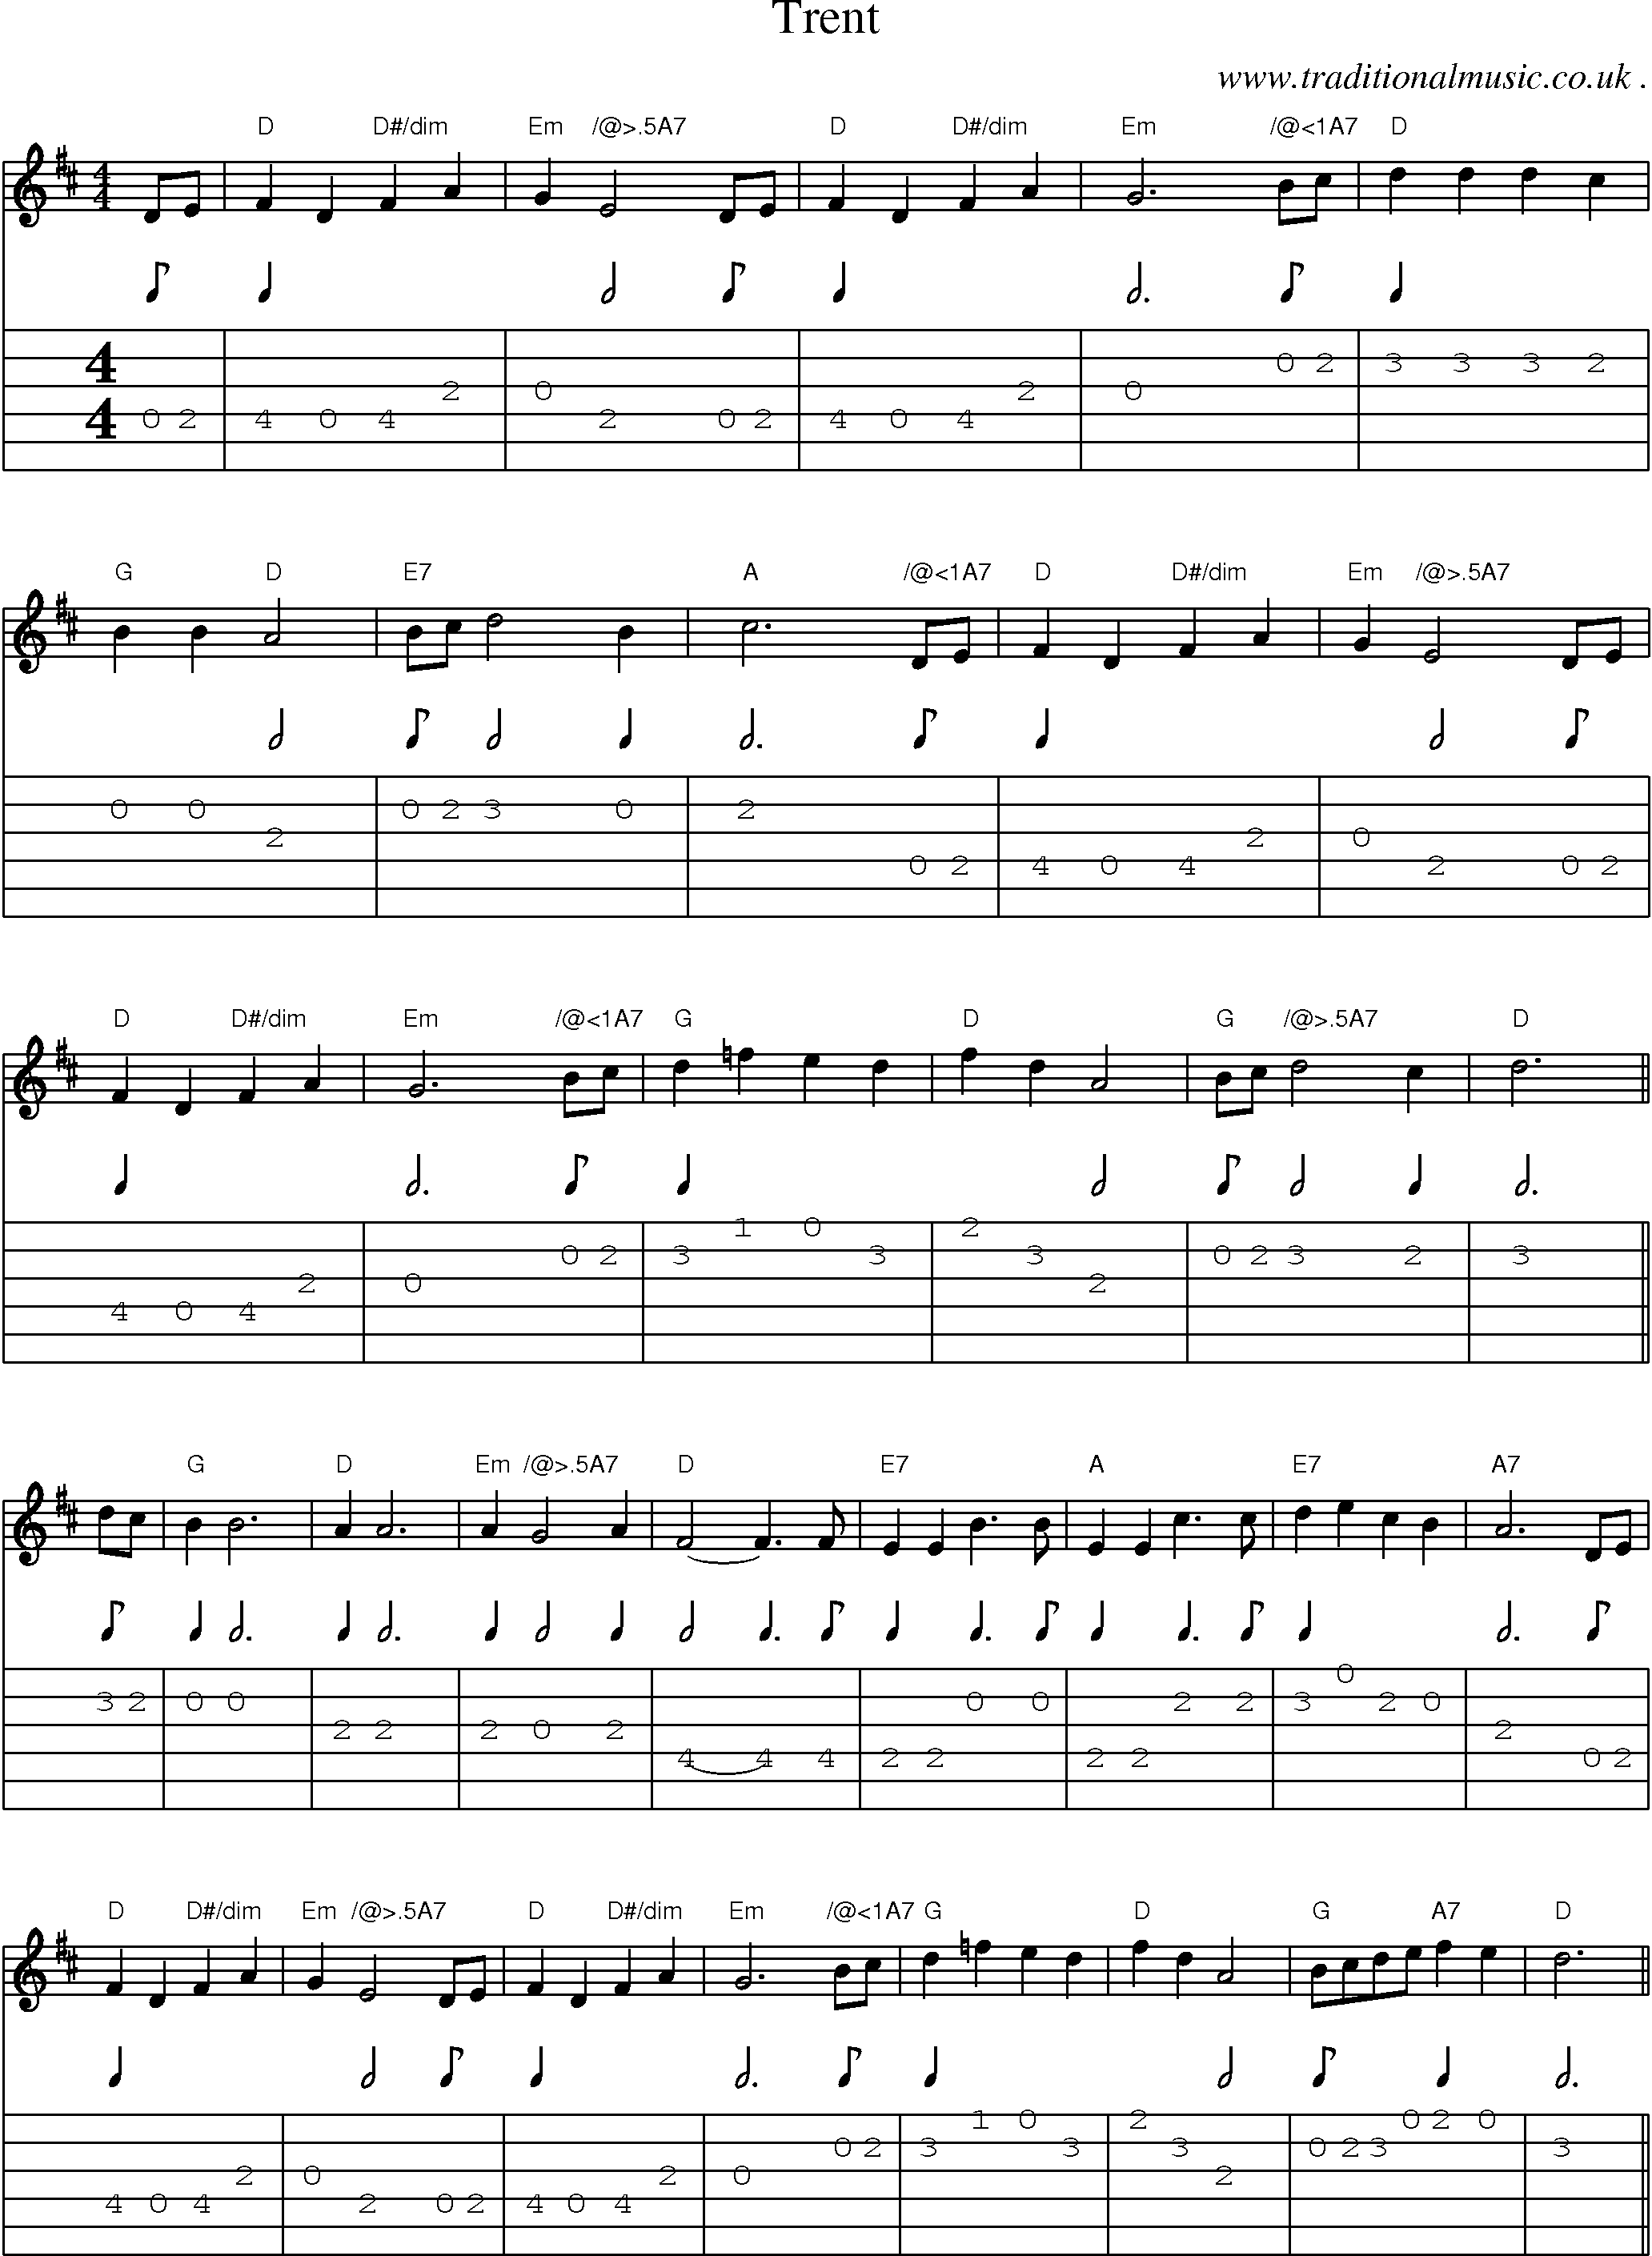 Sheet-Music and Guitar Tabs for Trent